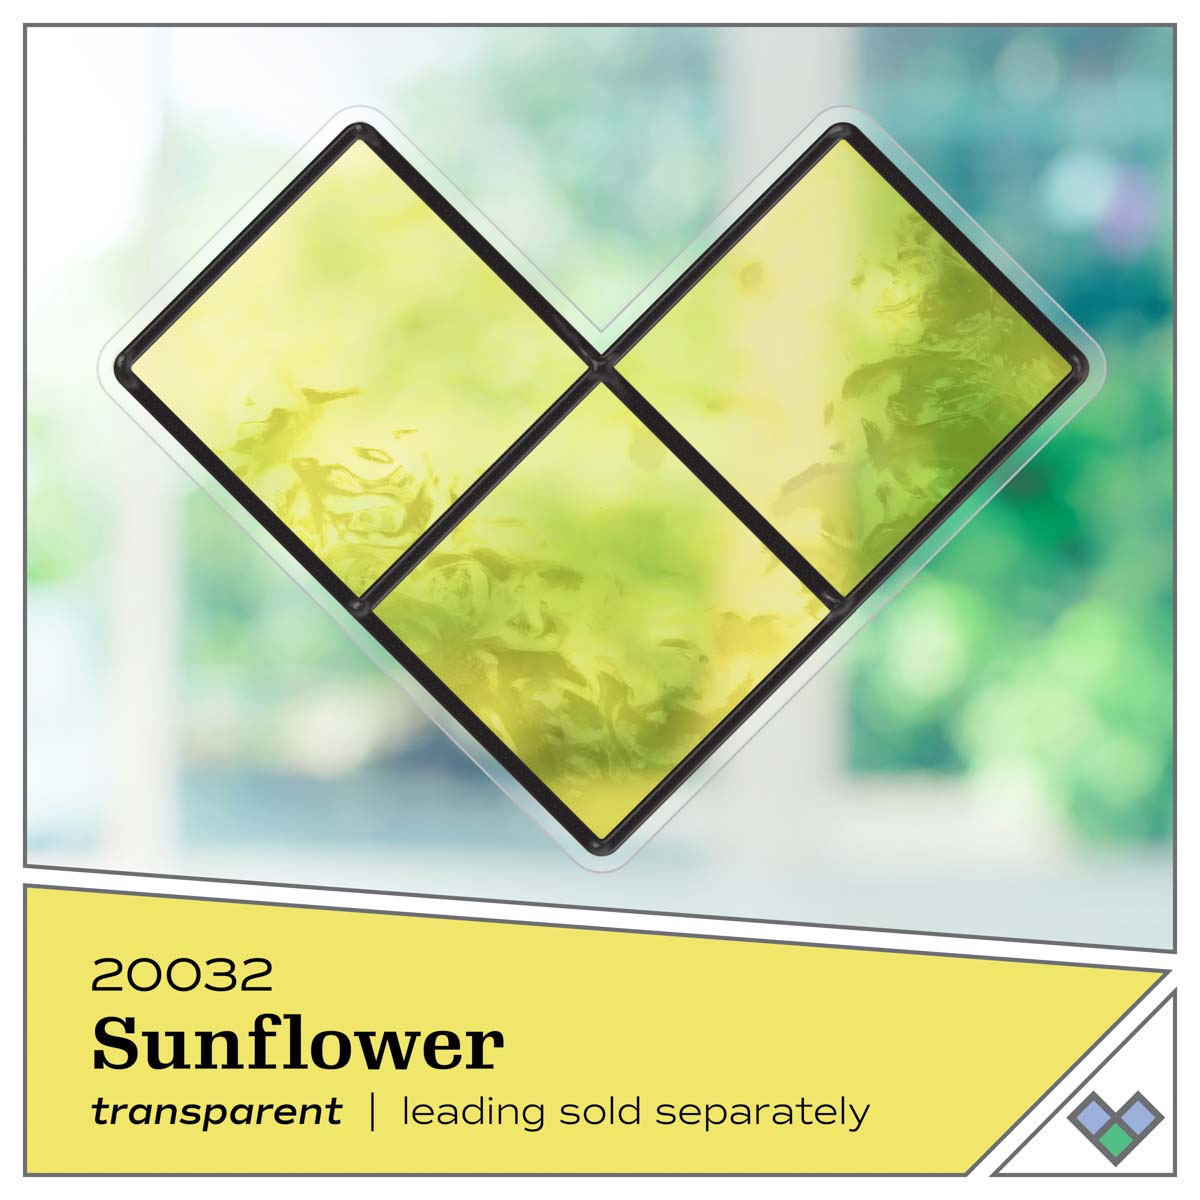 Gallery Glass ® Stained Glass Effect Paint - Sunflower, 2 oz. - 20032